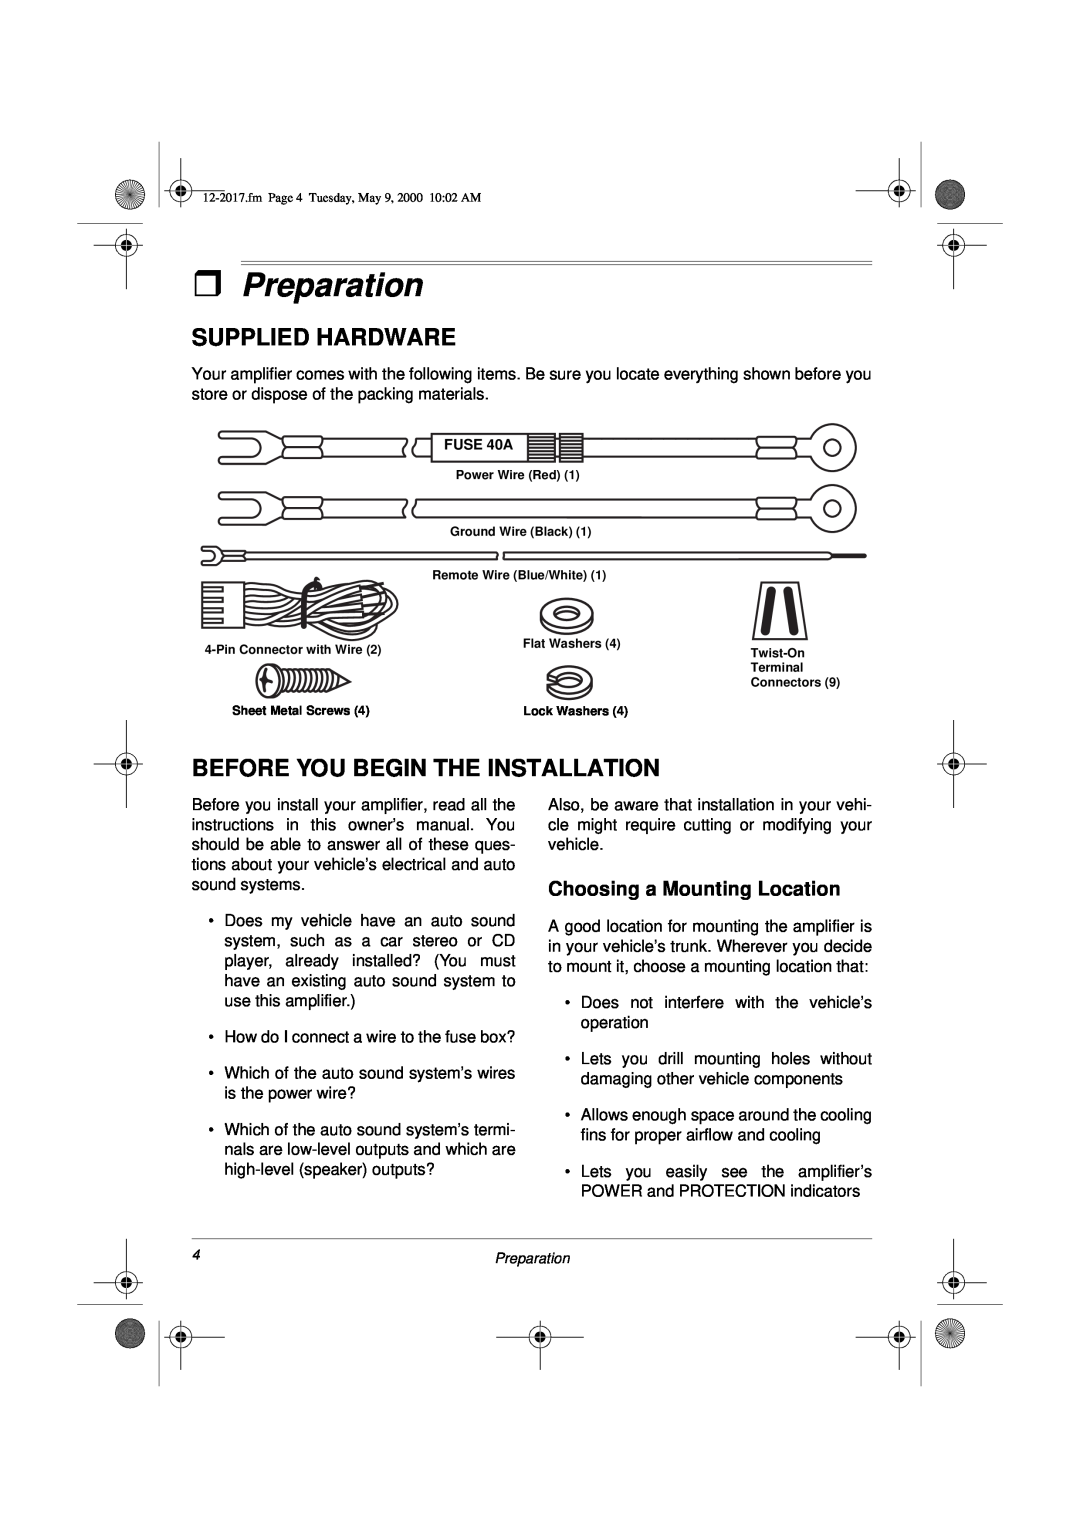 Radio Shack XL-260 ˆPreparation, Supplied Hardware, Before You Begin The Installation, Choosing a Mounting Location 